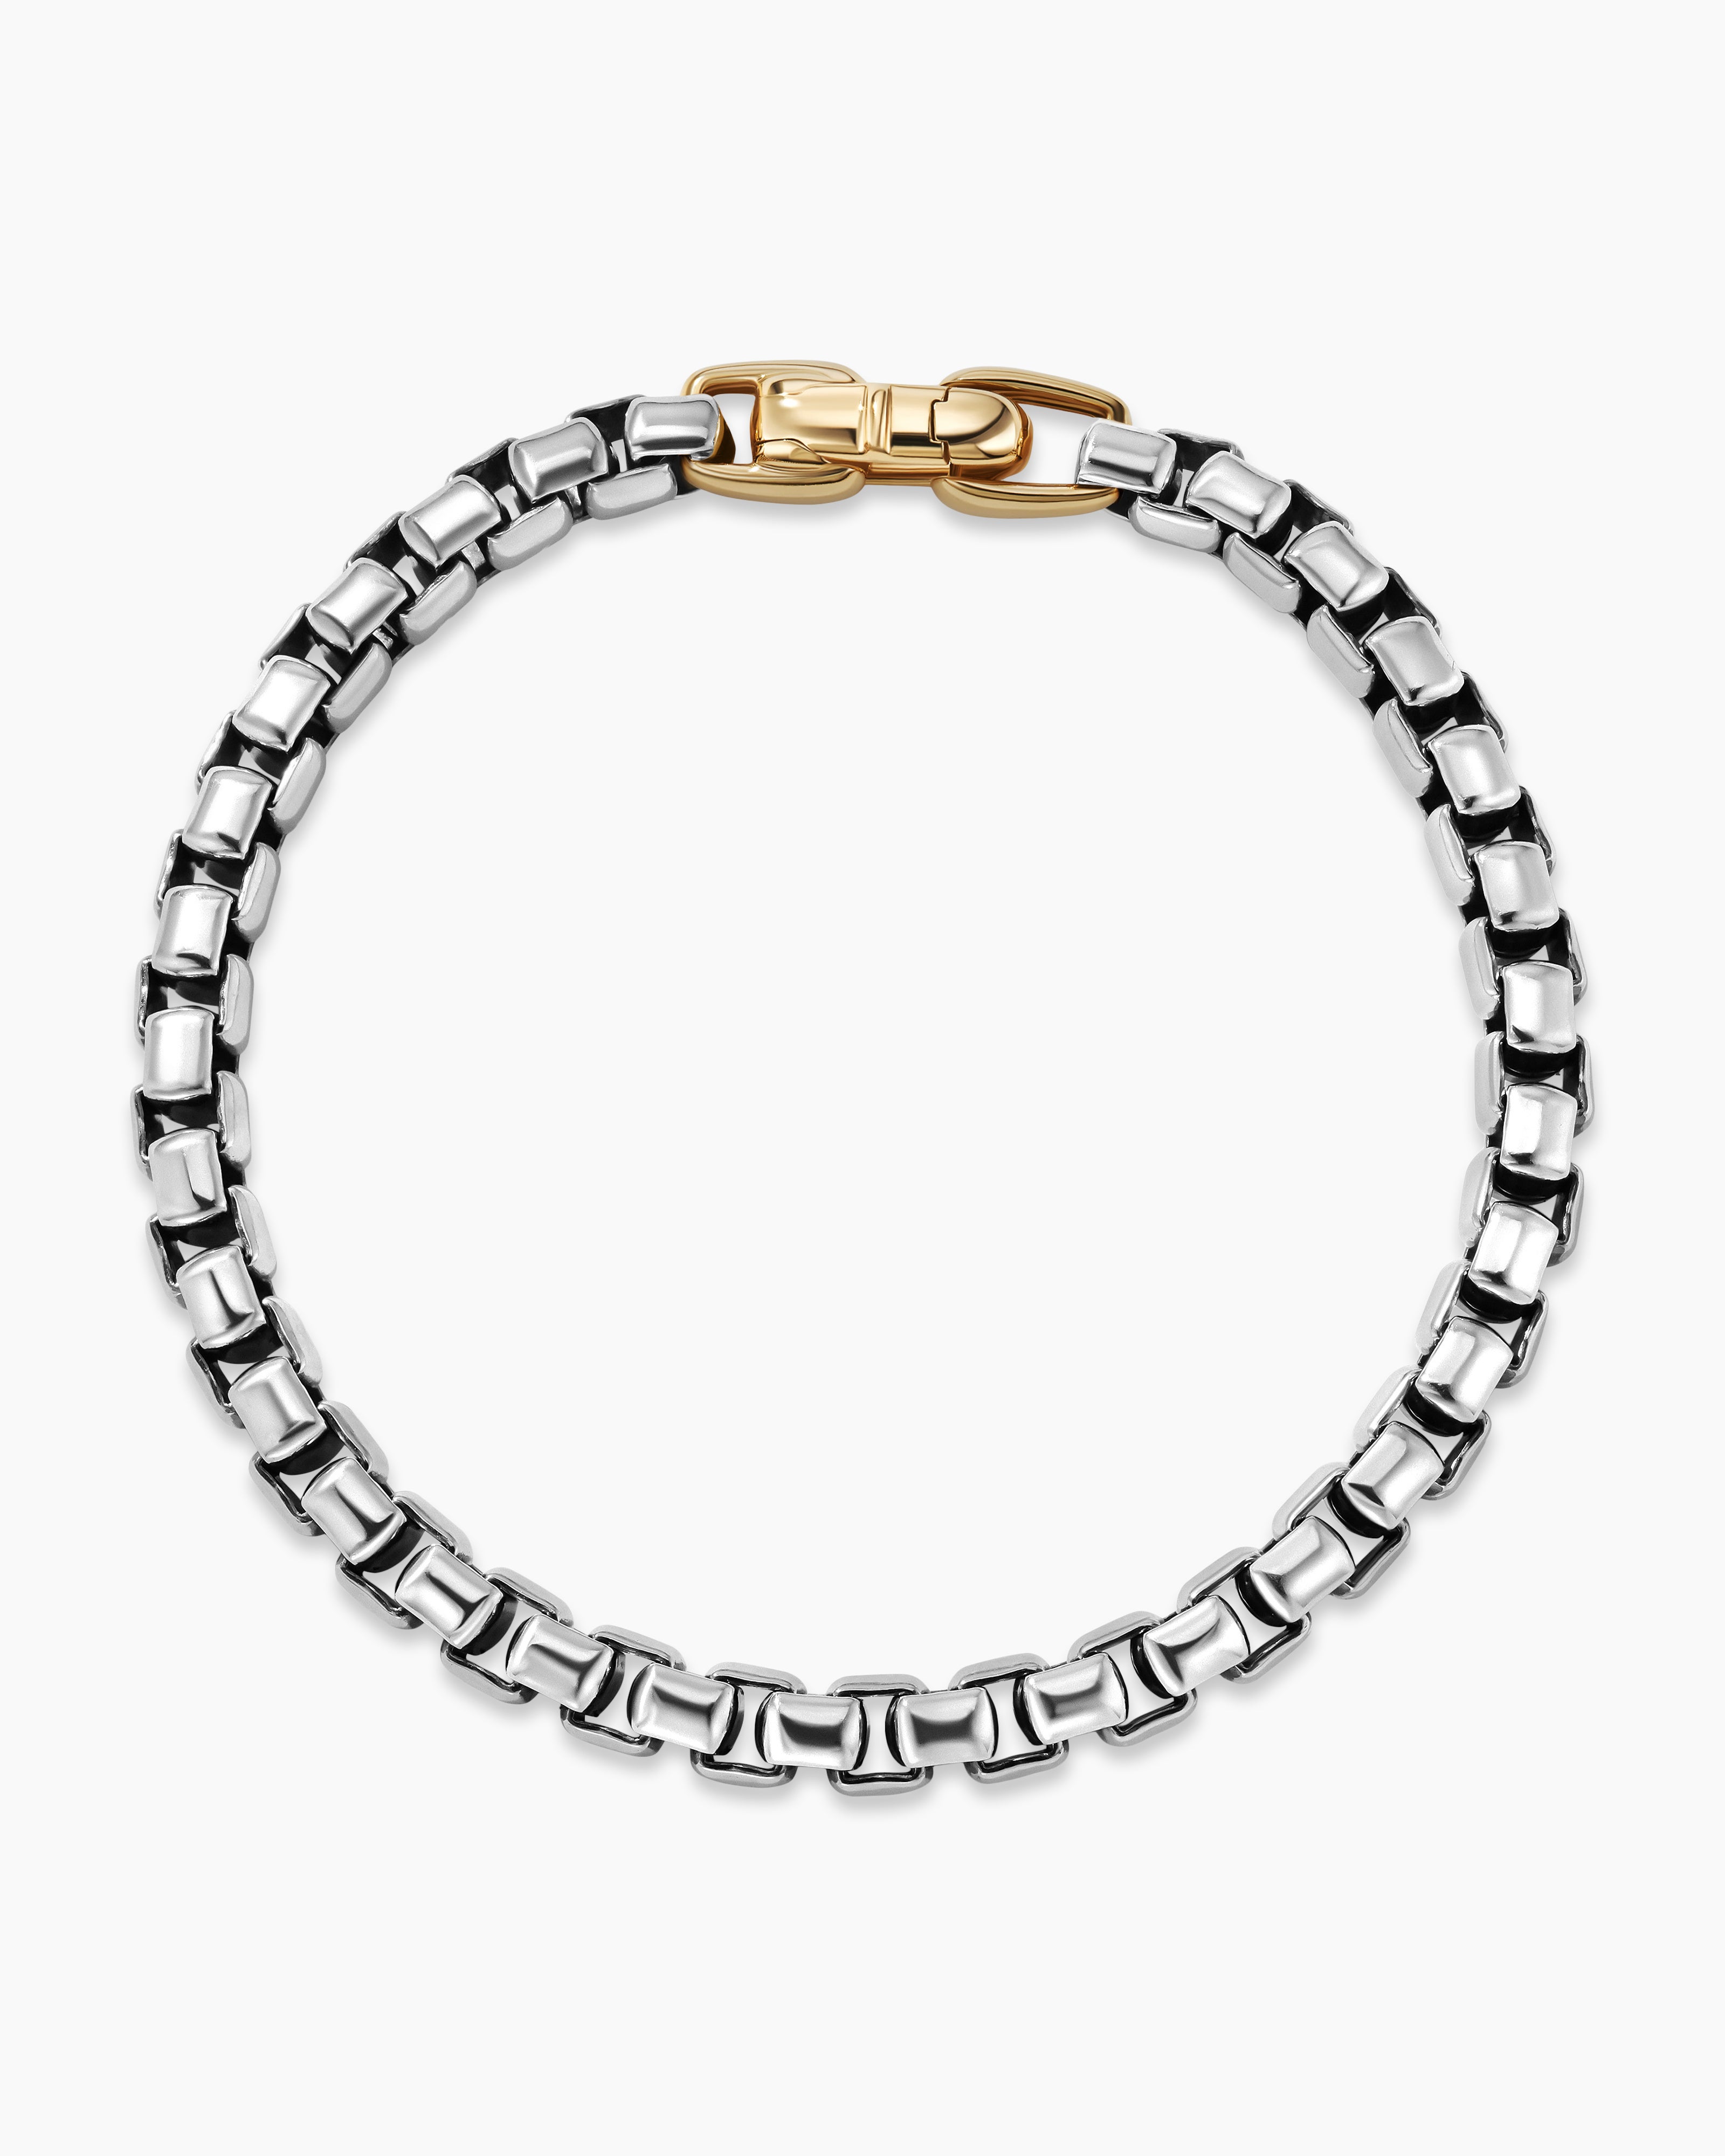 Sterling Yellow Yurman Gold, | Chain with in Silver 6mm Box DY 14K Bel Bracelet Aire David